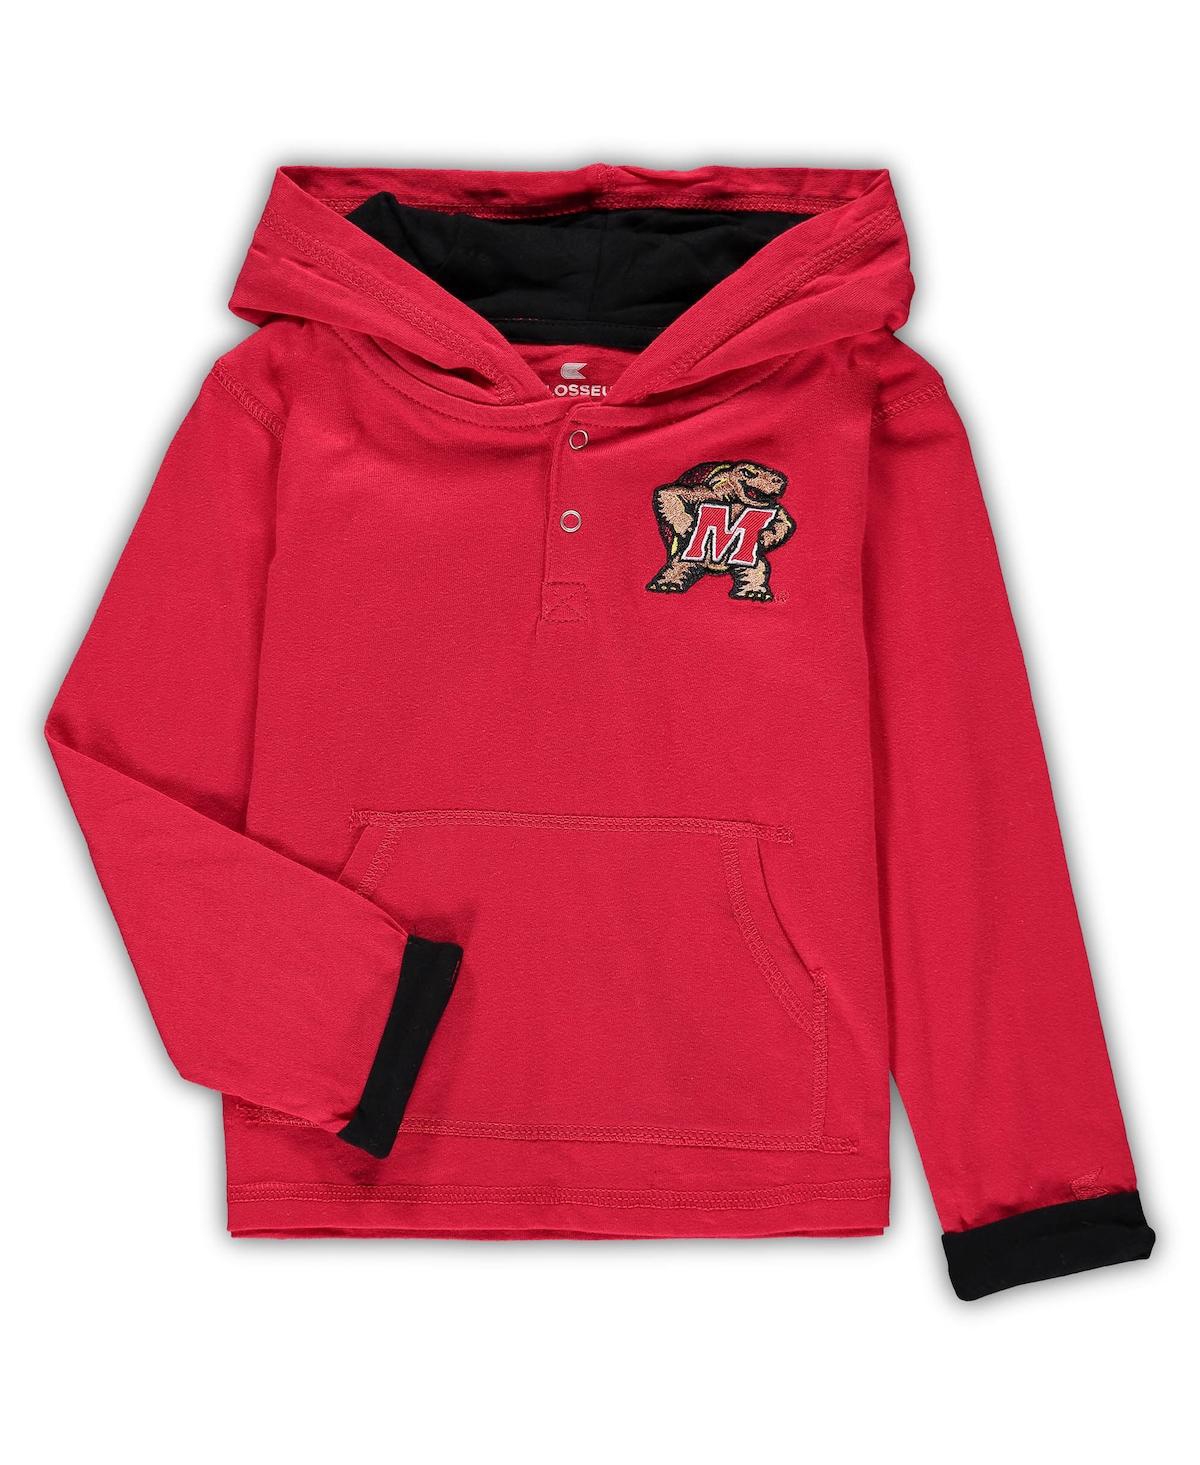 Shop Colosseum Toddler Boys  Red, Heathered Gray Maryland Terrapins Poppies Hoodie And Sweatpants Set In Red,heathered Gray